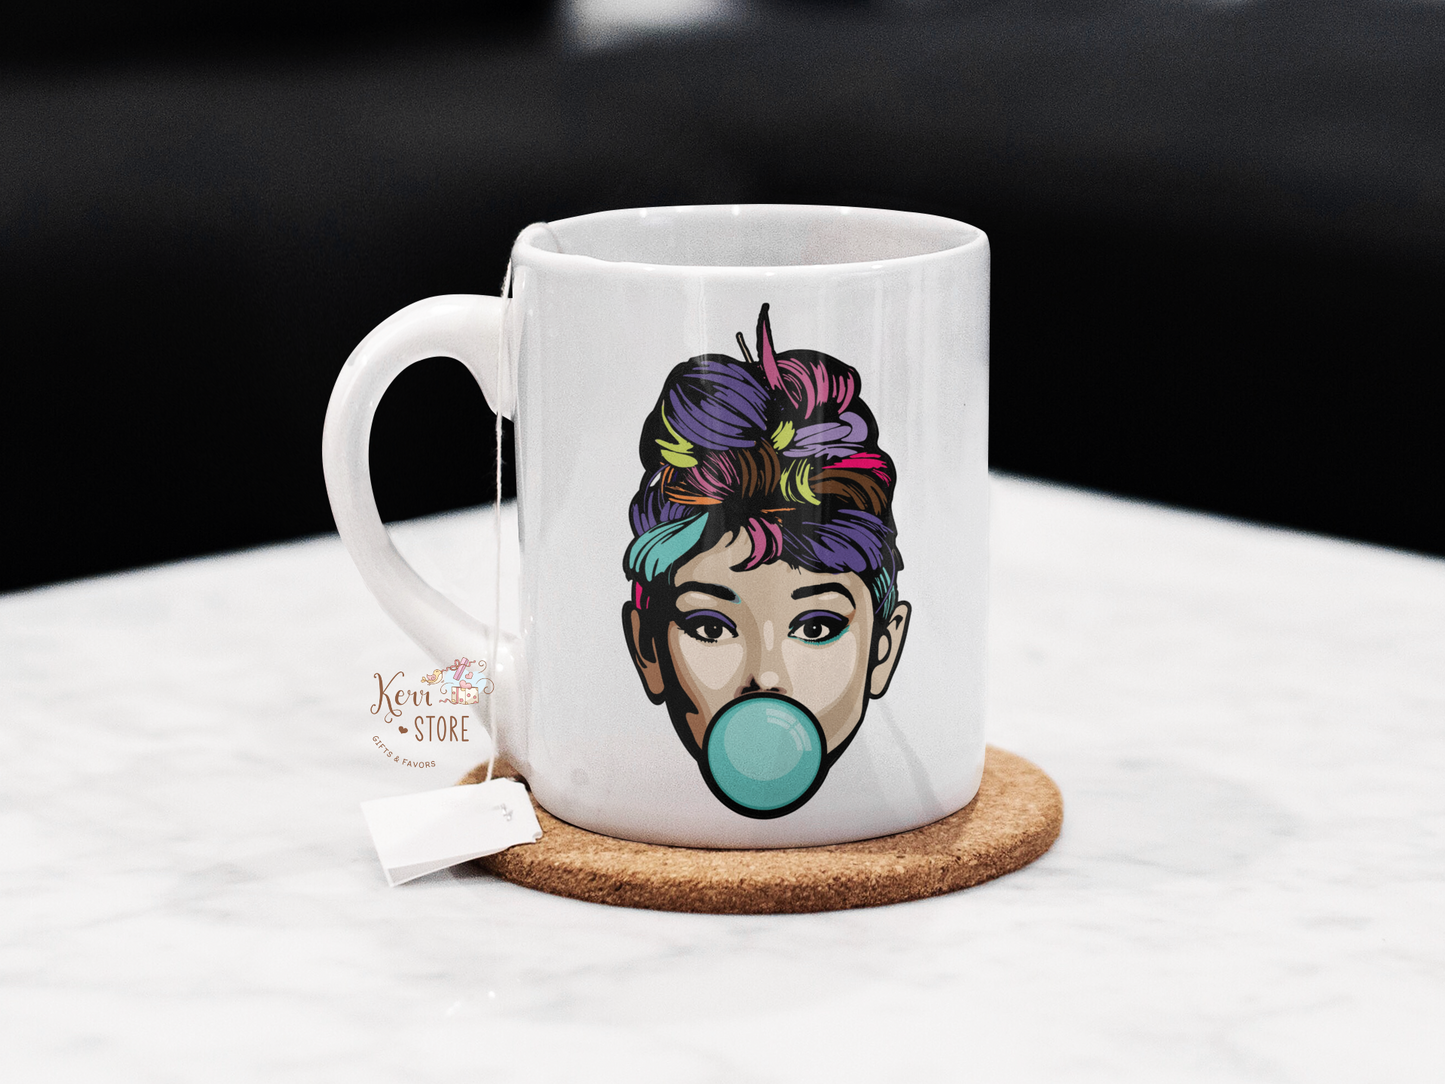 Audrey Hepburn street art mug great gift for a special one